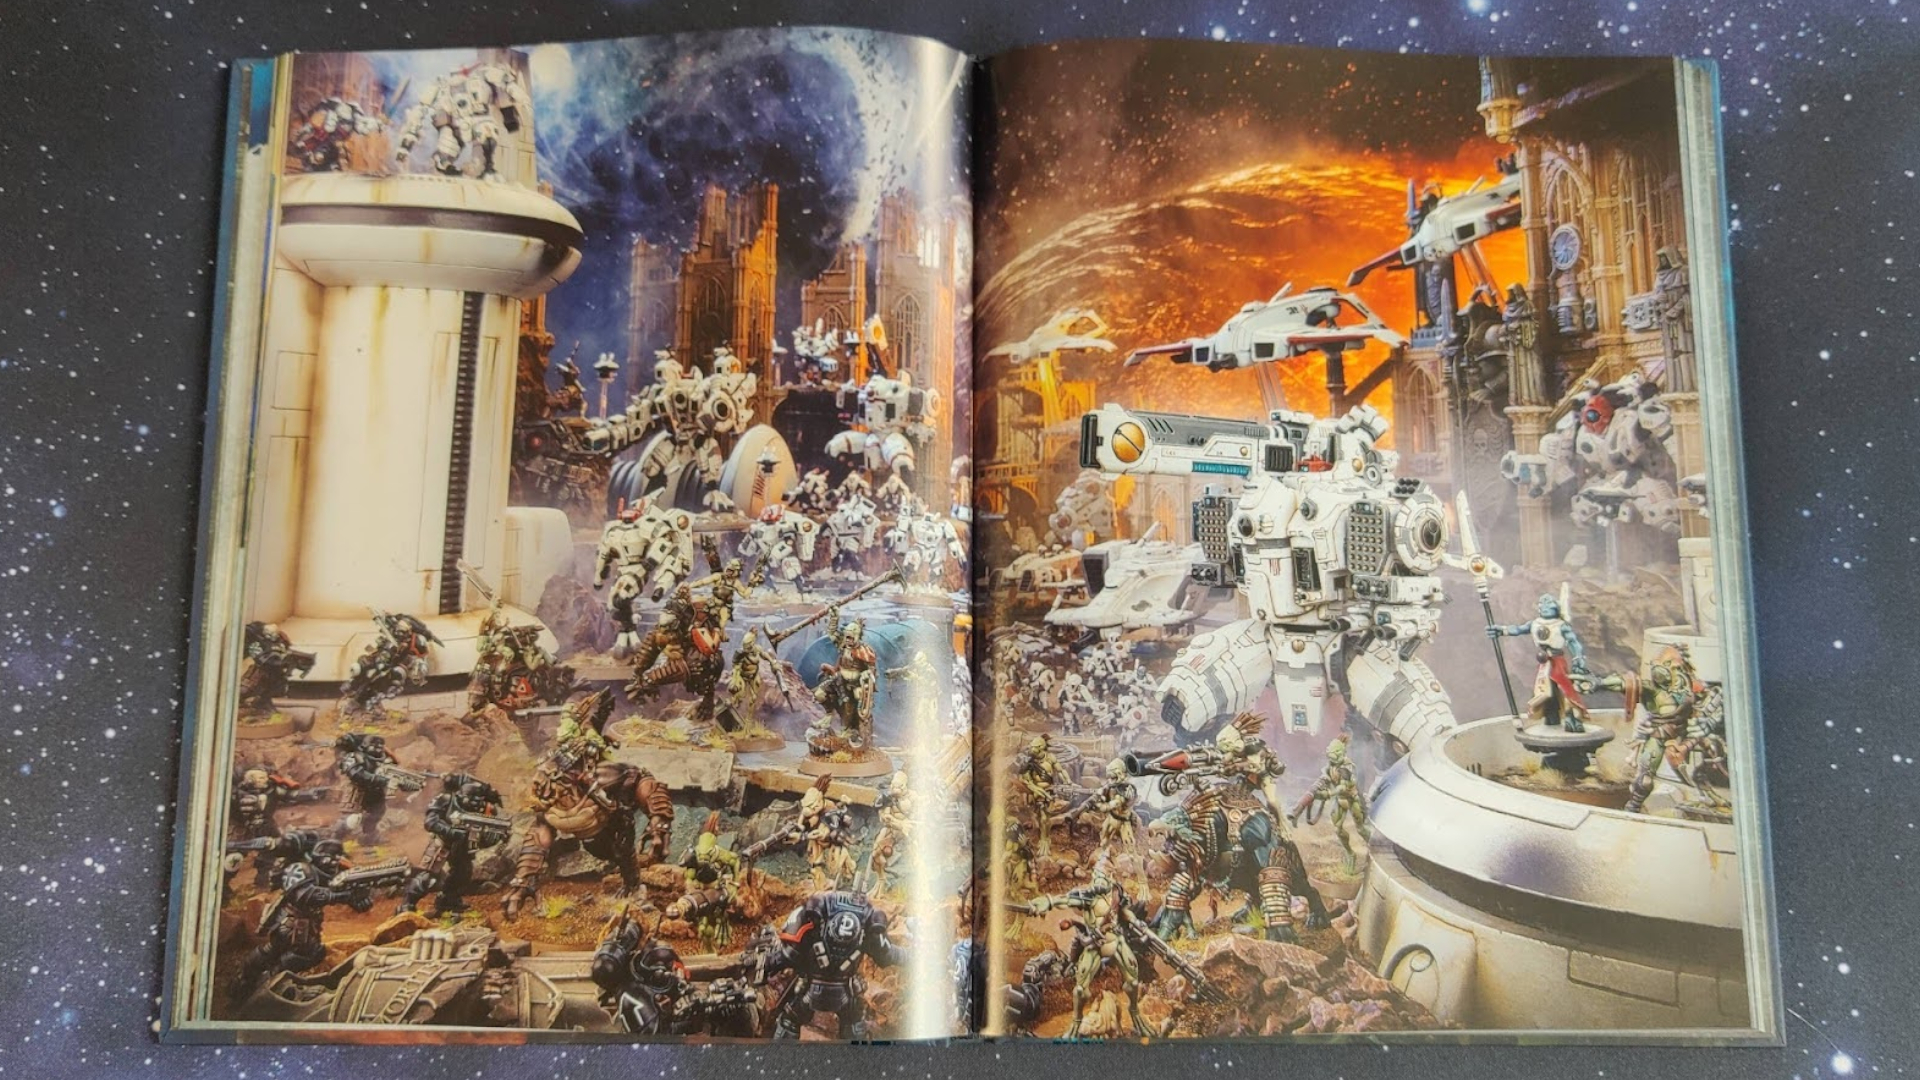 Open pages displaying T'au models